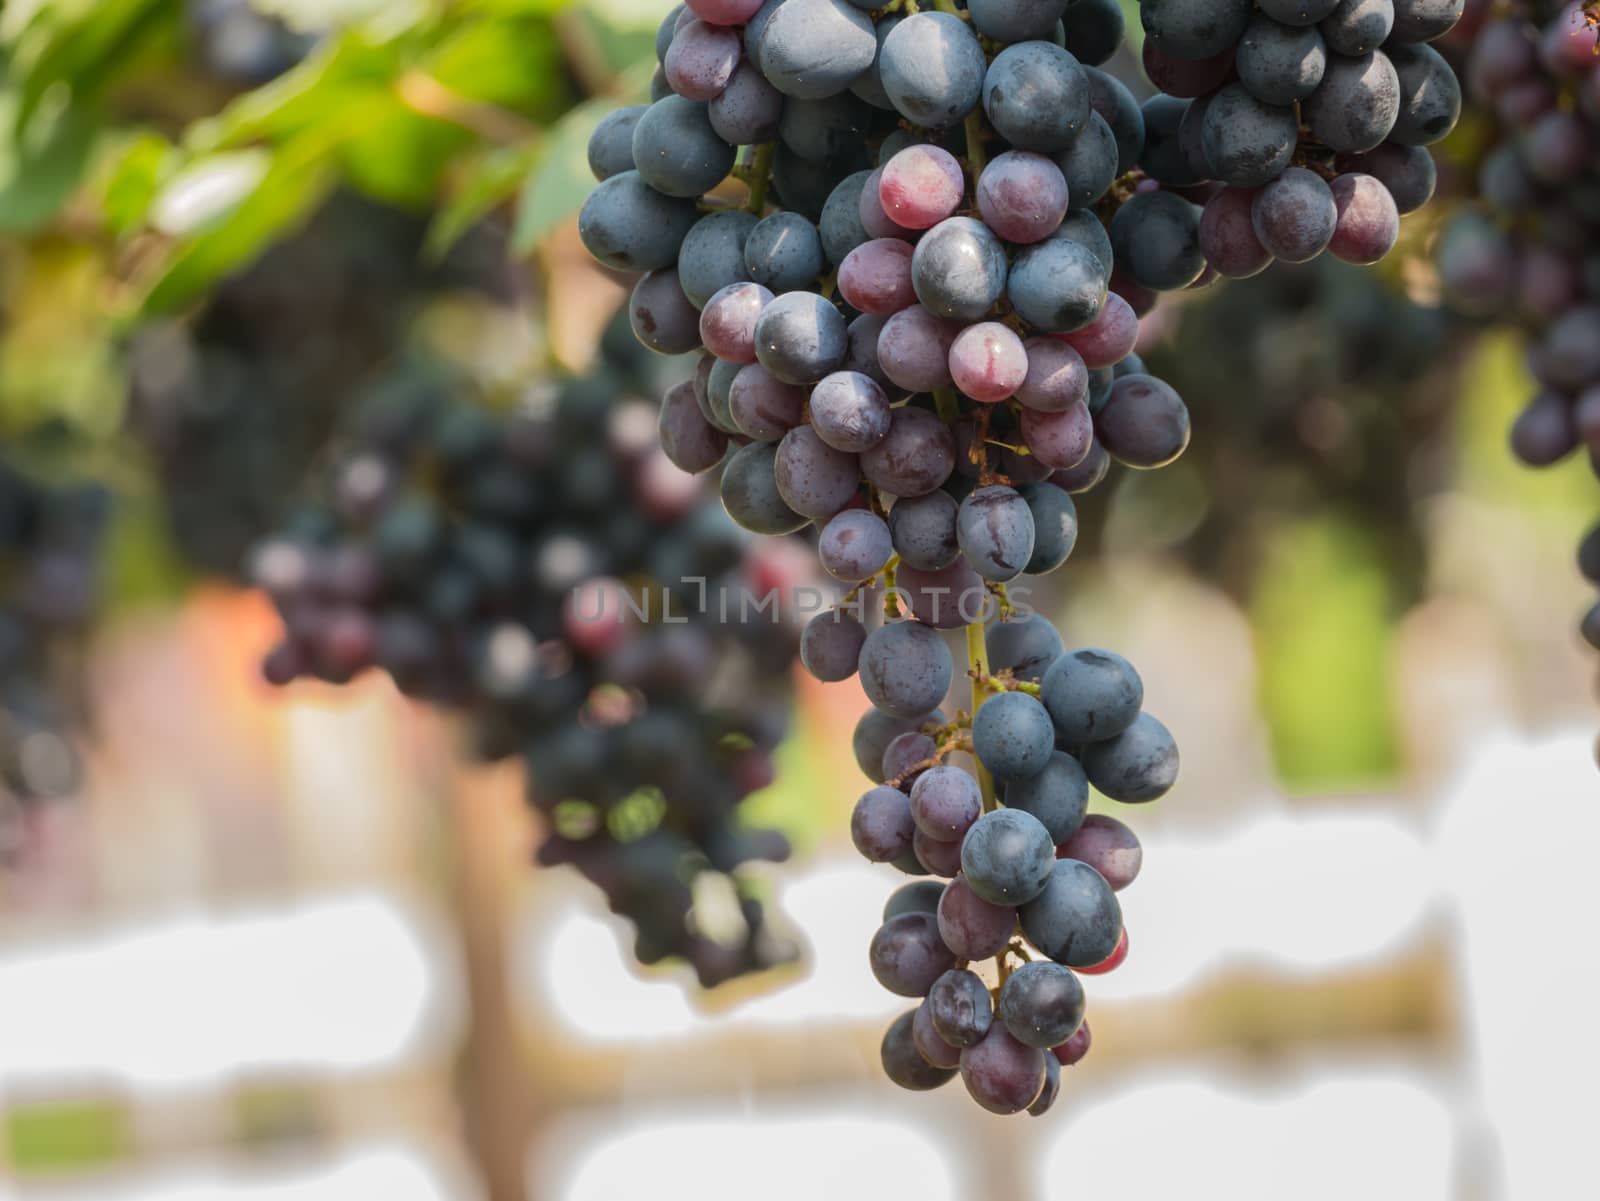 purple red grapes with green leaves on the vine. fresh fruits by nikky1972